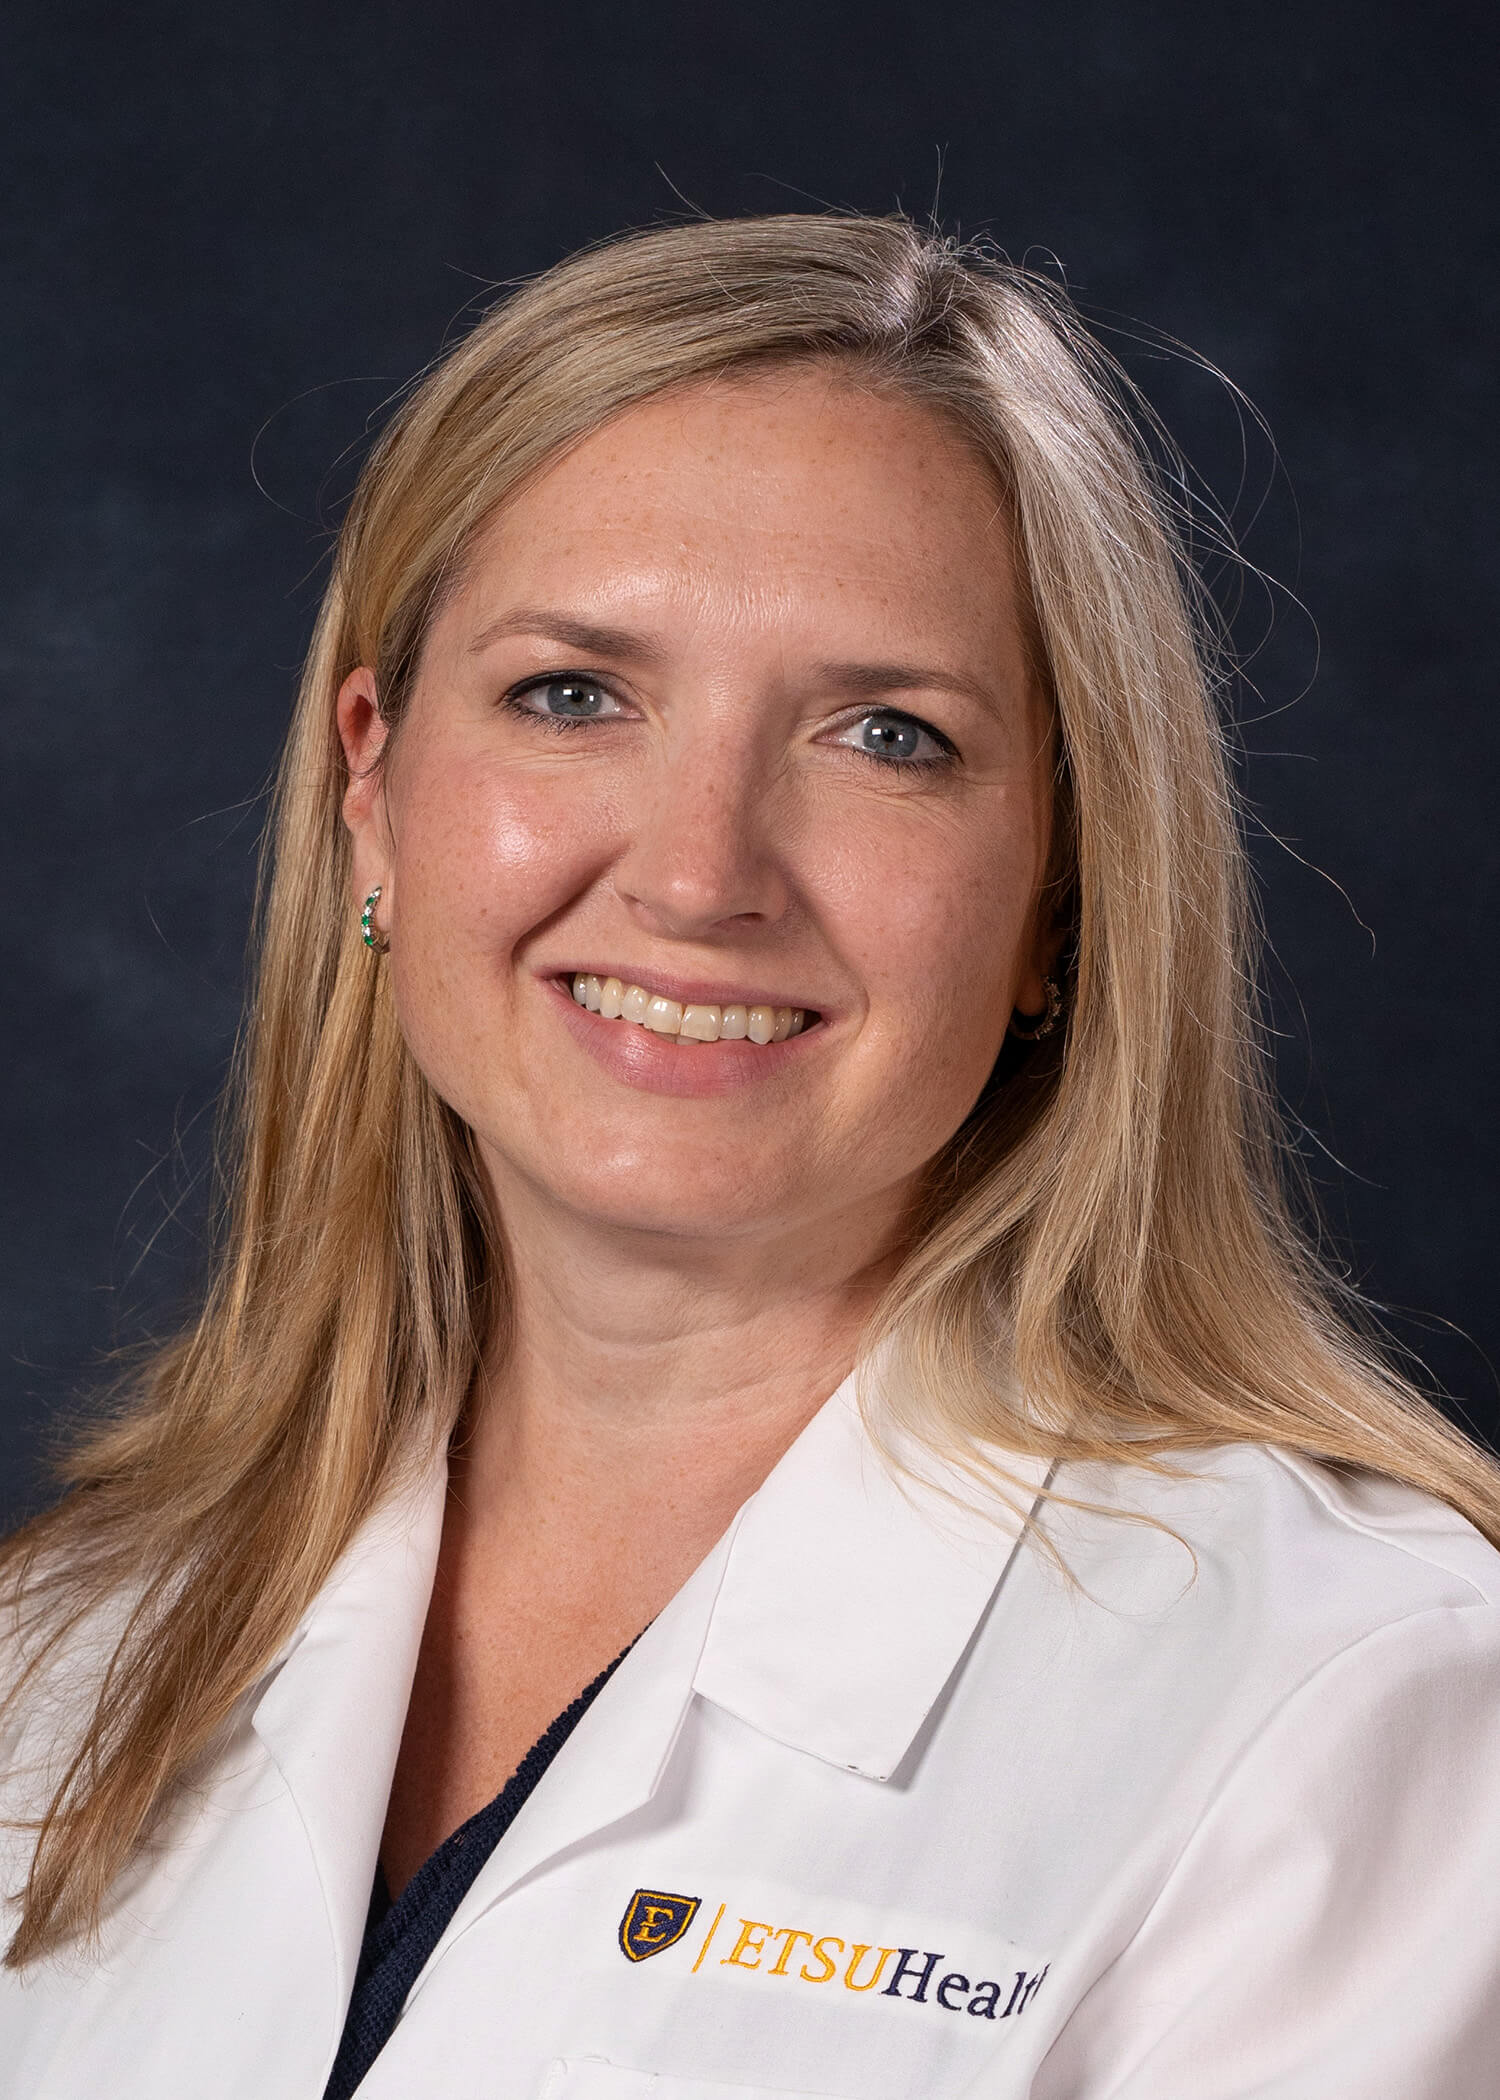 Photo of Molly Oxford, M.D.